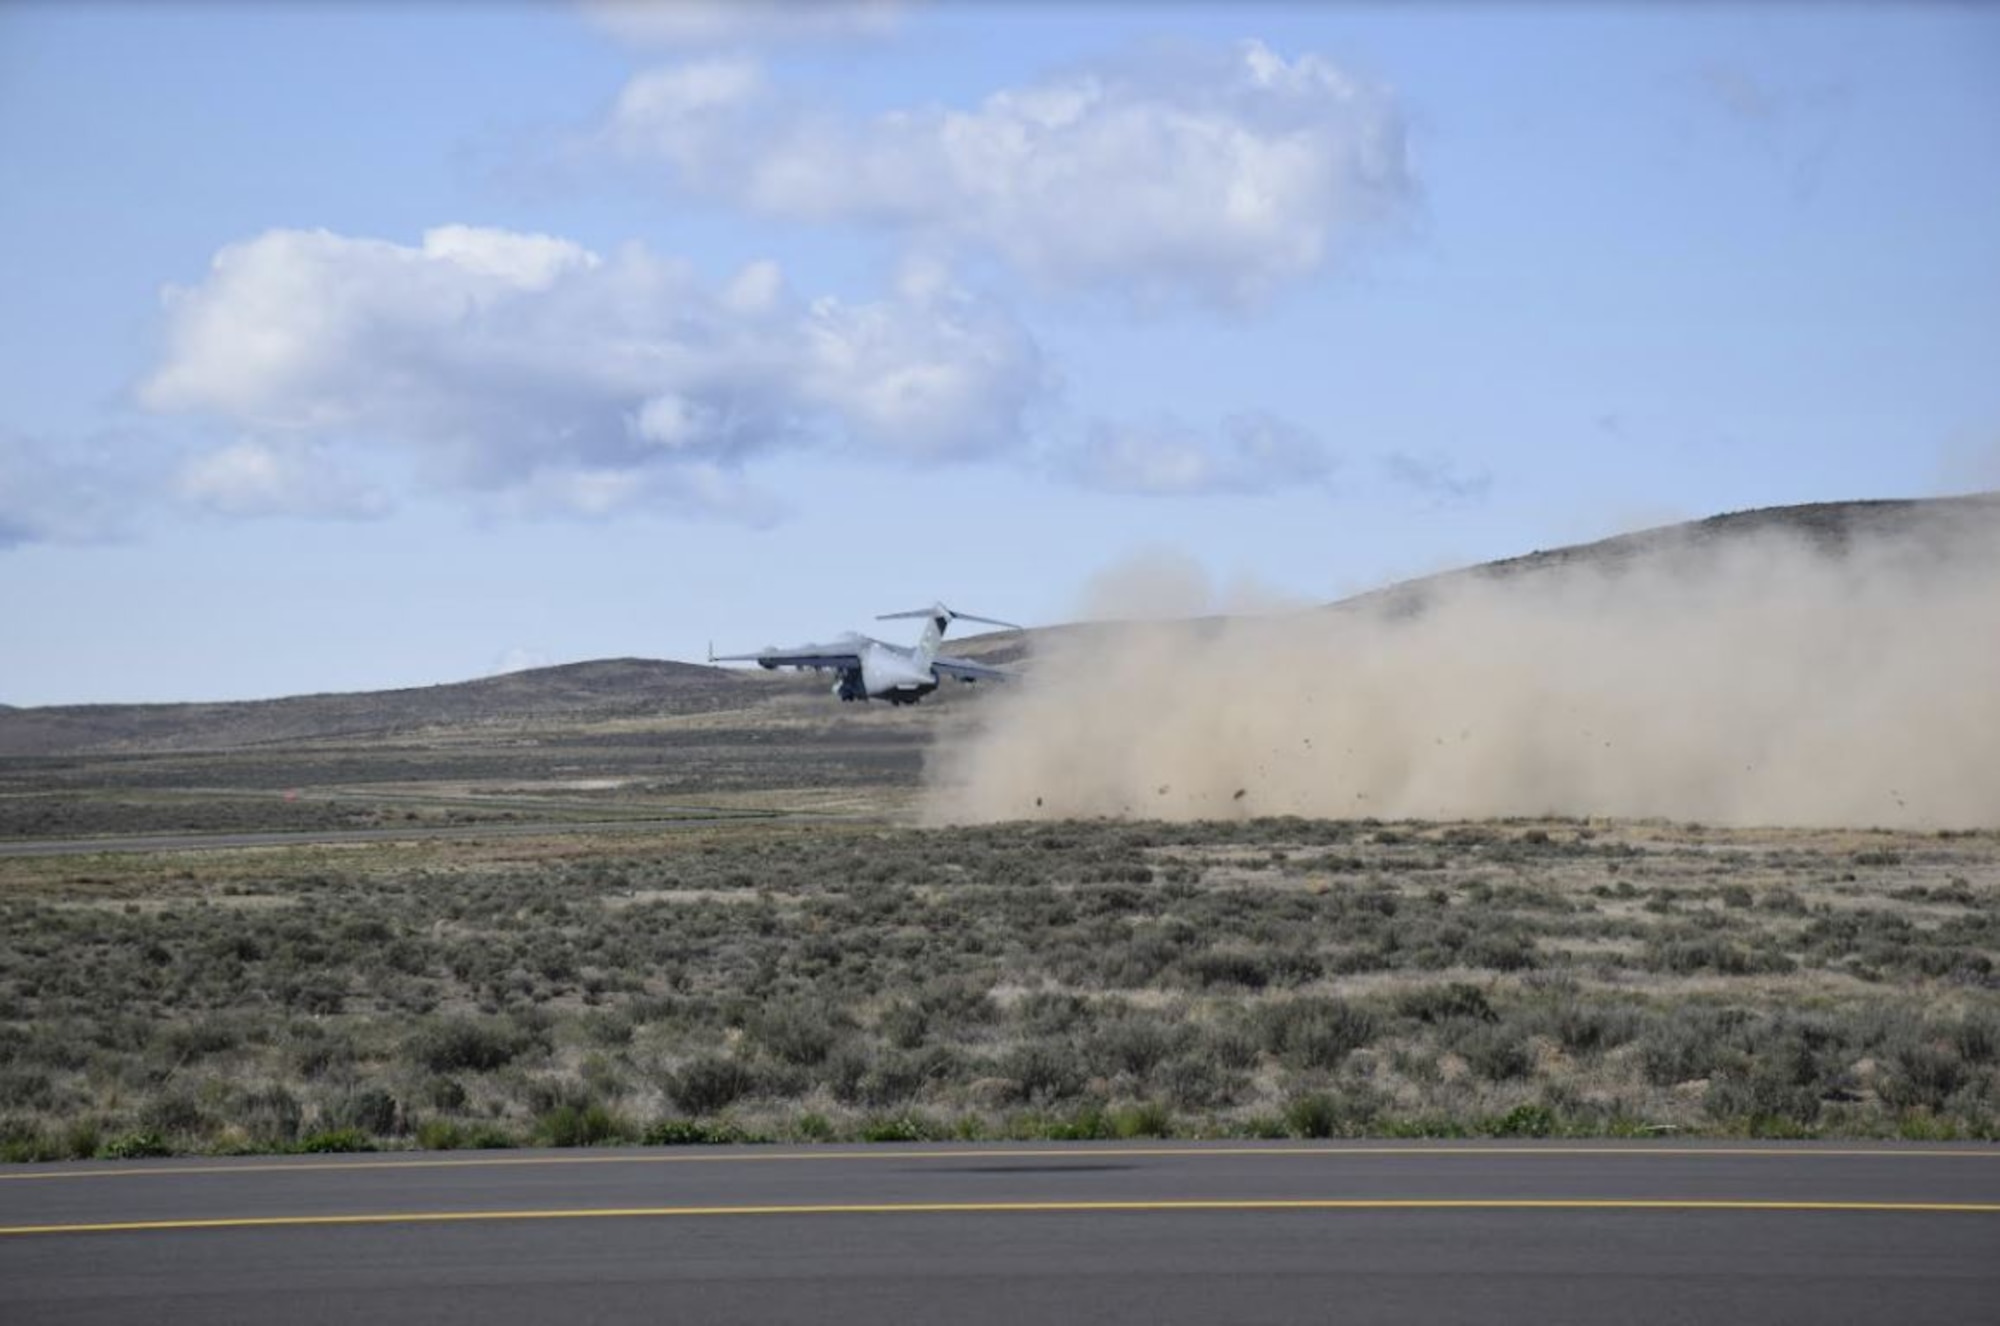 A C-17 Globemaster III takes off from the Mettie Airstrip at Yakima Training Center, Wash., April 23, 2020. Instructors and students of the C-17 Weapons Instructor Course (WIC) taught out of the 57th Weapons Squadron on Joint Base Lewis-McChord, Wash. conducted an aeromedical evacuation exercise as part of the scenario based training phase of the WIC. (Courtesy Photo)